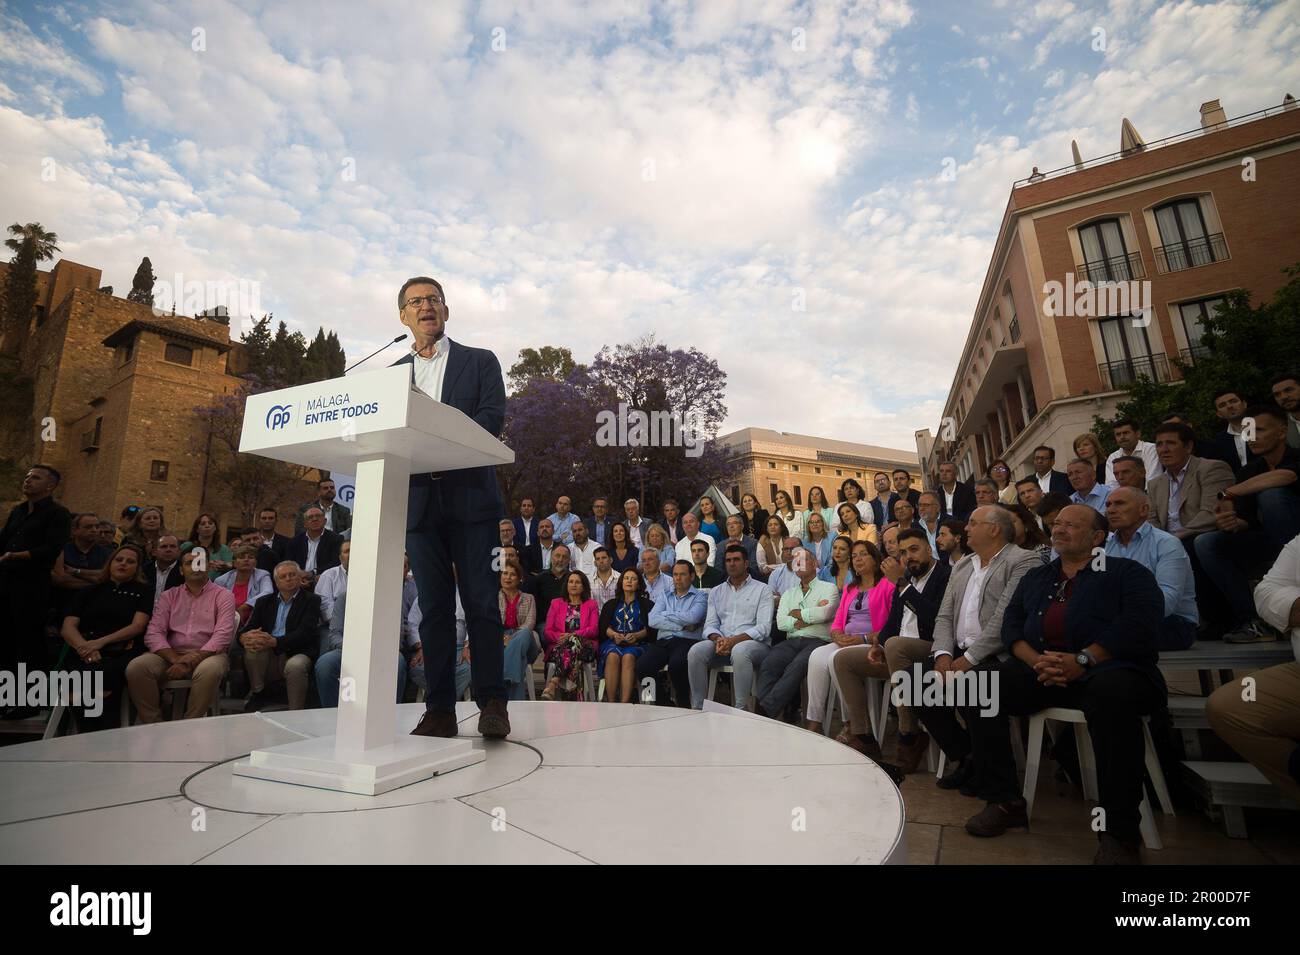 Malaga, Spain. 05th May, 2023. Spanish Popular Party leader Alberto Nunez Feijoo is seen delivering a speech as he takes part in an electoral pre-campaign event. The president of the Spanish Popular Party, Alberto Nunez Feijoo, has begun a tour of pre-election events in several cities across the country to support the Popular Party's candidates for the upcoming municipal elections. The results of the municipal elections on May 28th could influence the vote in the Spanish general elections at the end of the year. (Photo by Jesus Merida/SOPA Images/Sipa USA) Credit: Sipa USA/Alamy Live News Stock Photo